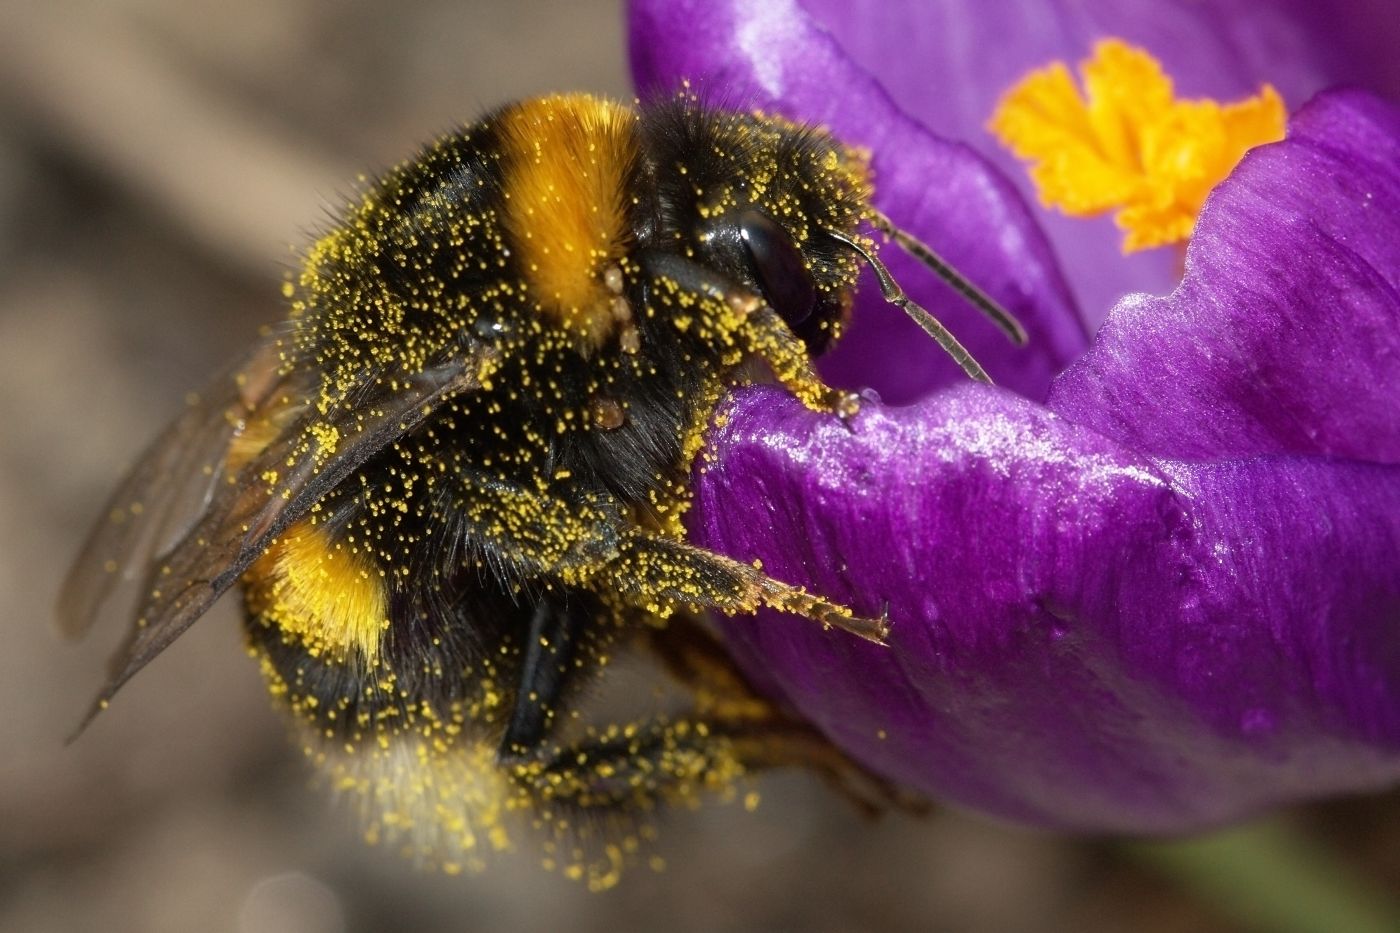 The new study used a radar to show how individual bees explore their environment and search for food